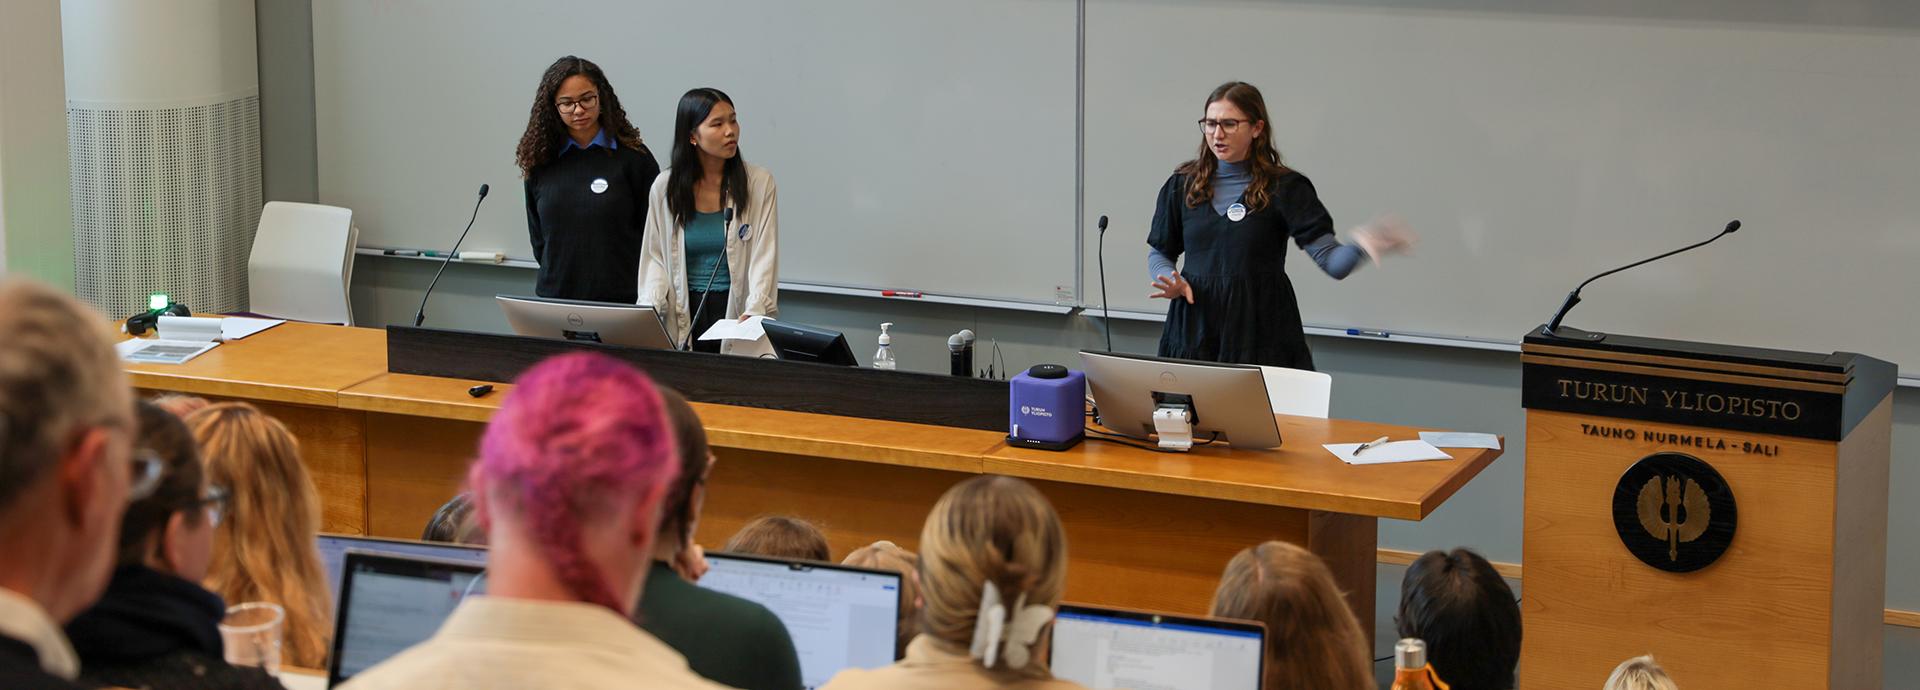 Fulbright U.S. Students Claudia Partridge, Skye Pham, and Chase Friel presenting at the 30th American Voices seminar at the University of Turku.